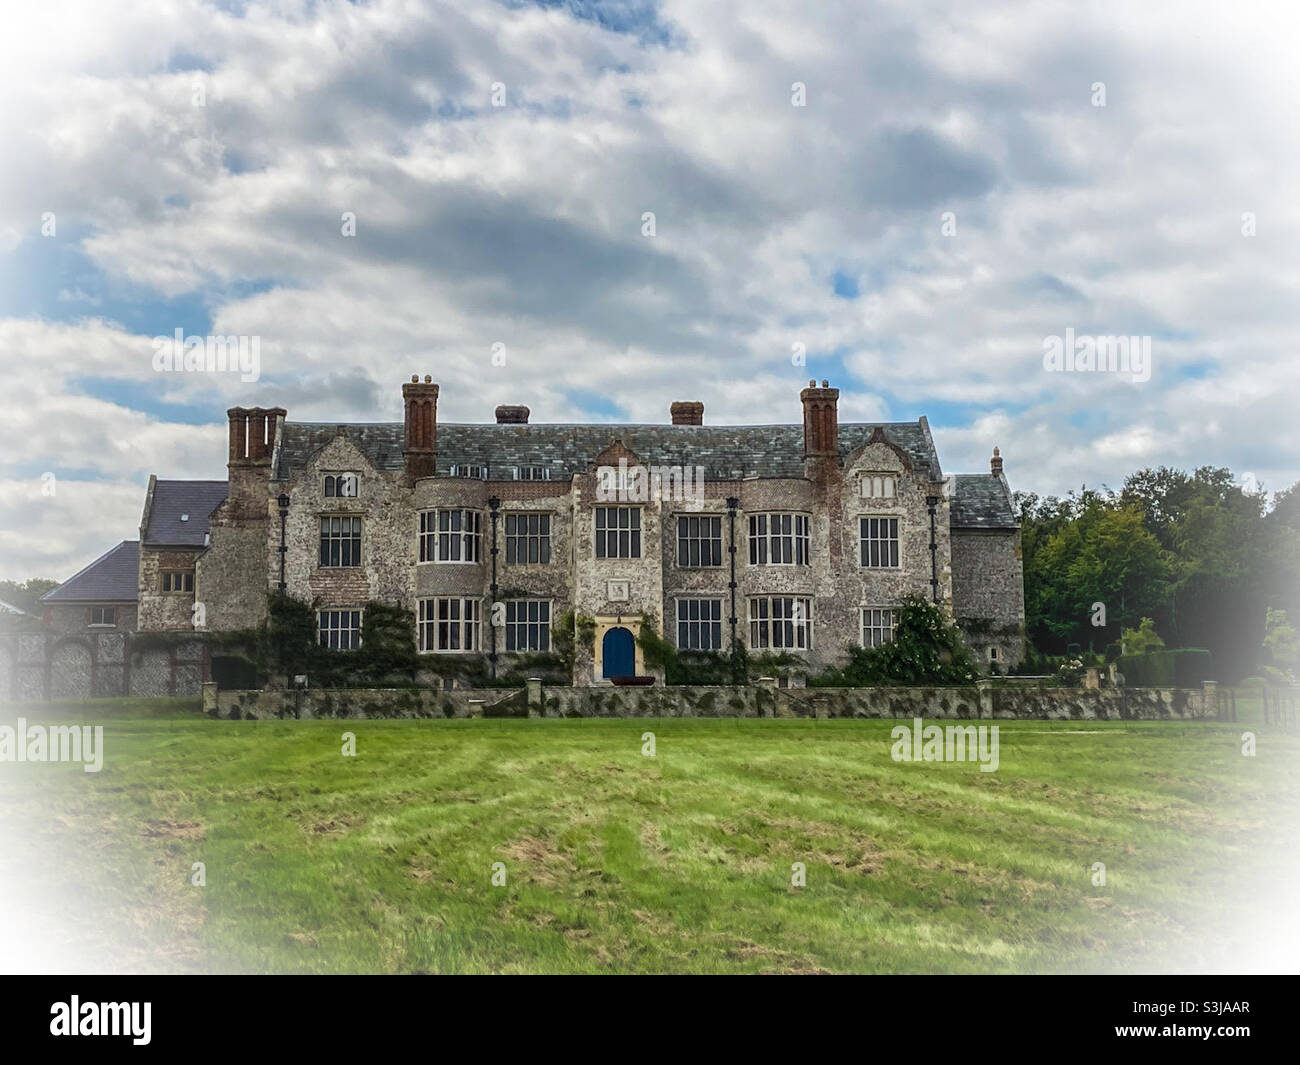 Glynde Place Elizabethan Manor House in Glynde, Lewes, East Sussex.  As seen from the private parkland.  Home to the current Viscount Hampden and his family. Stock Photo